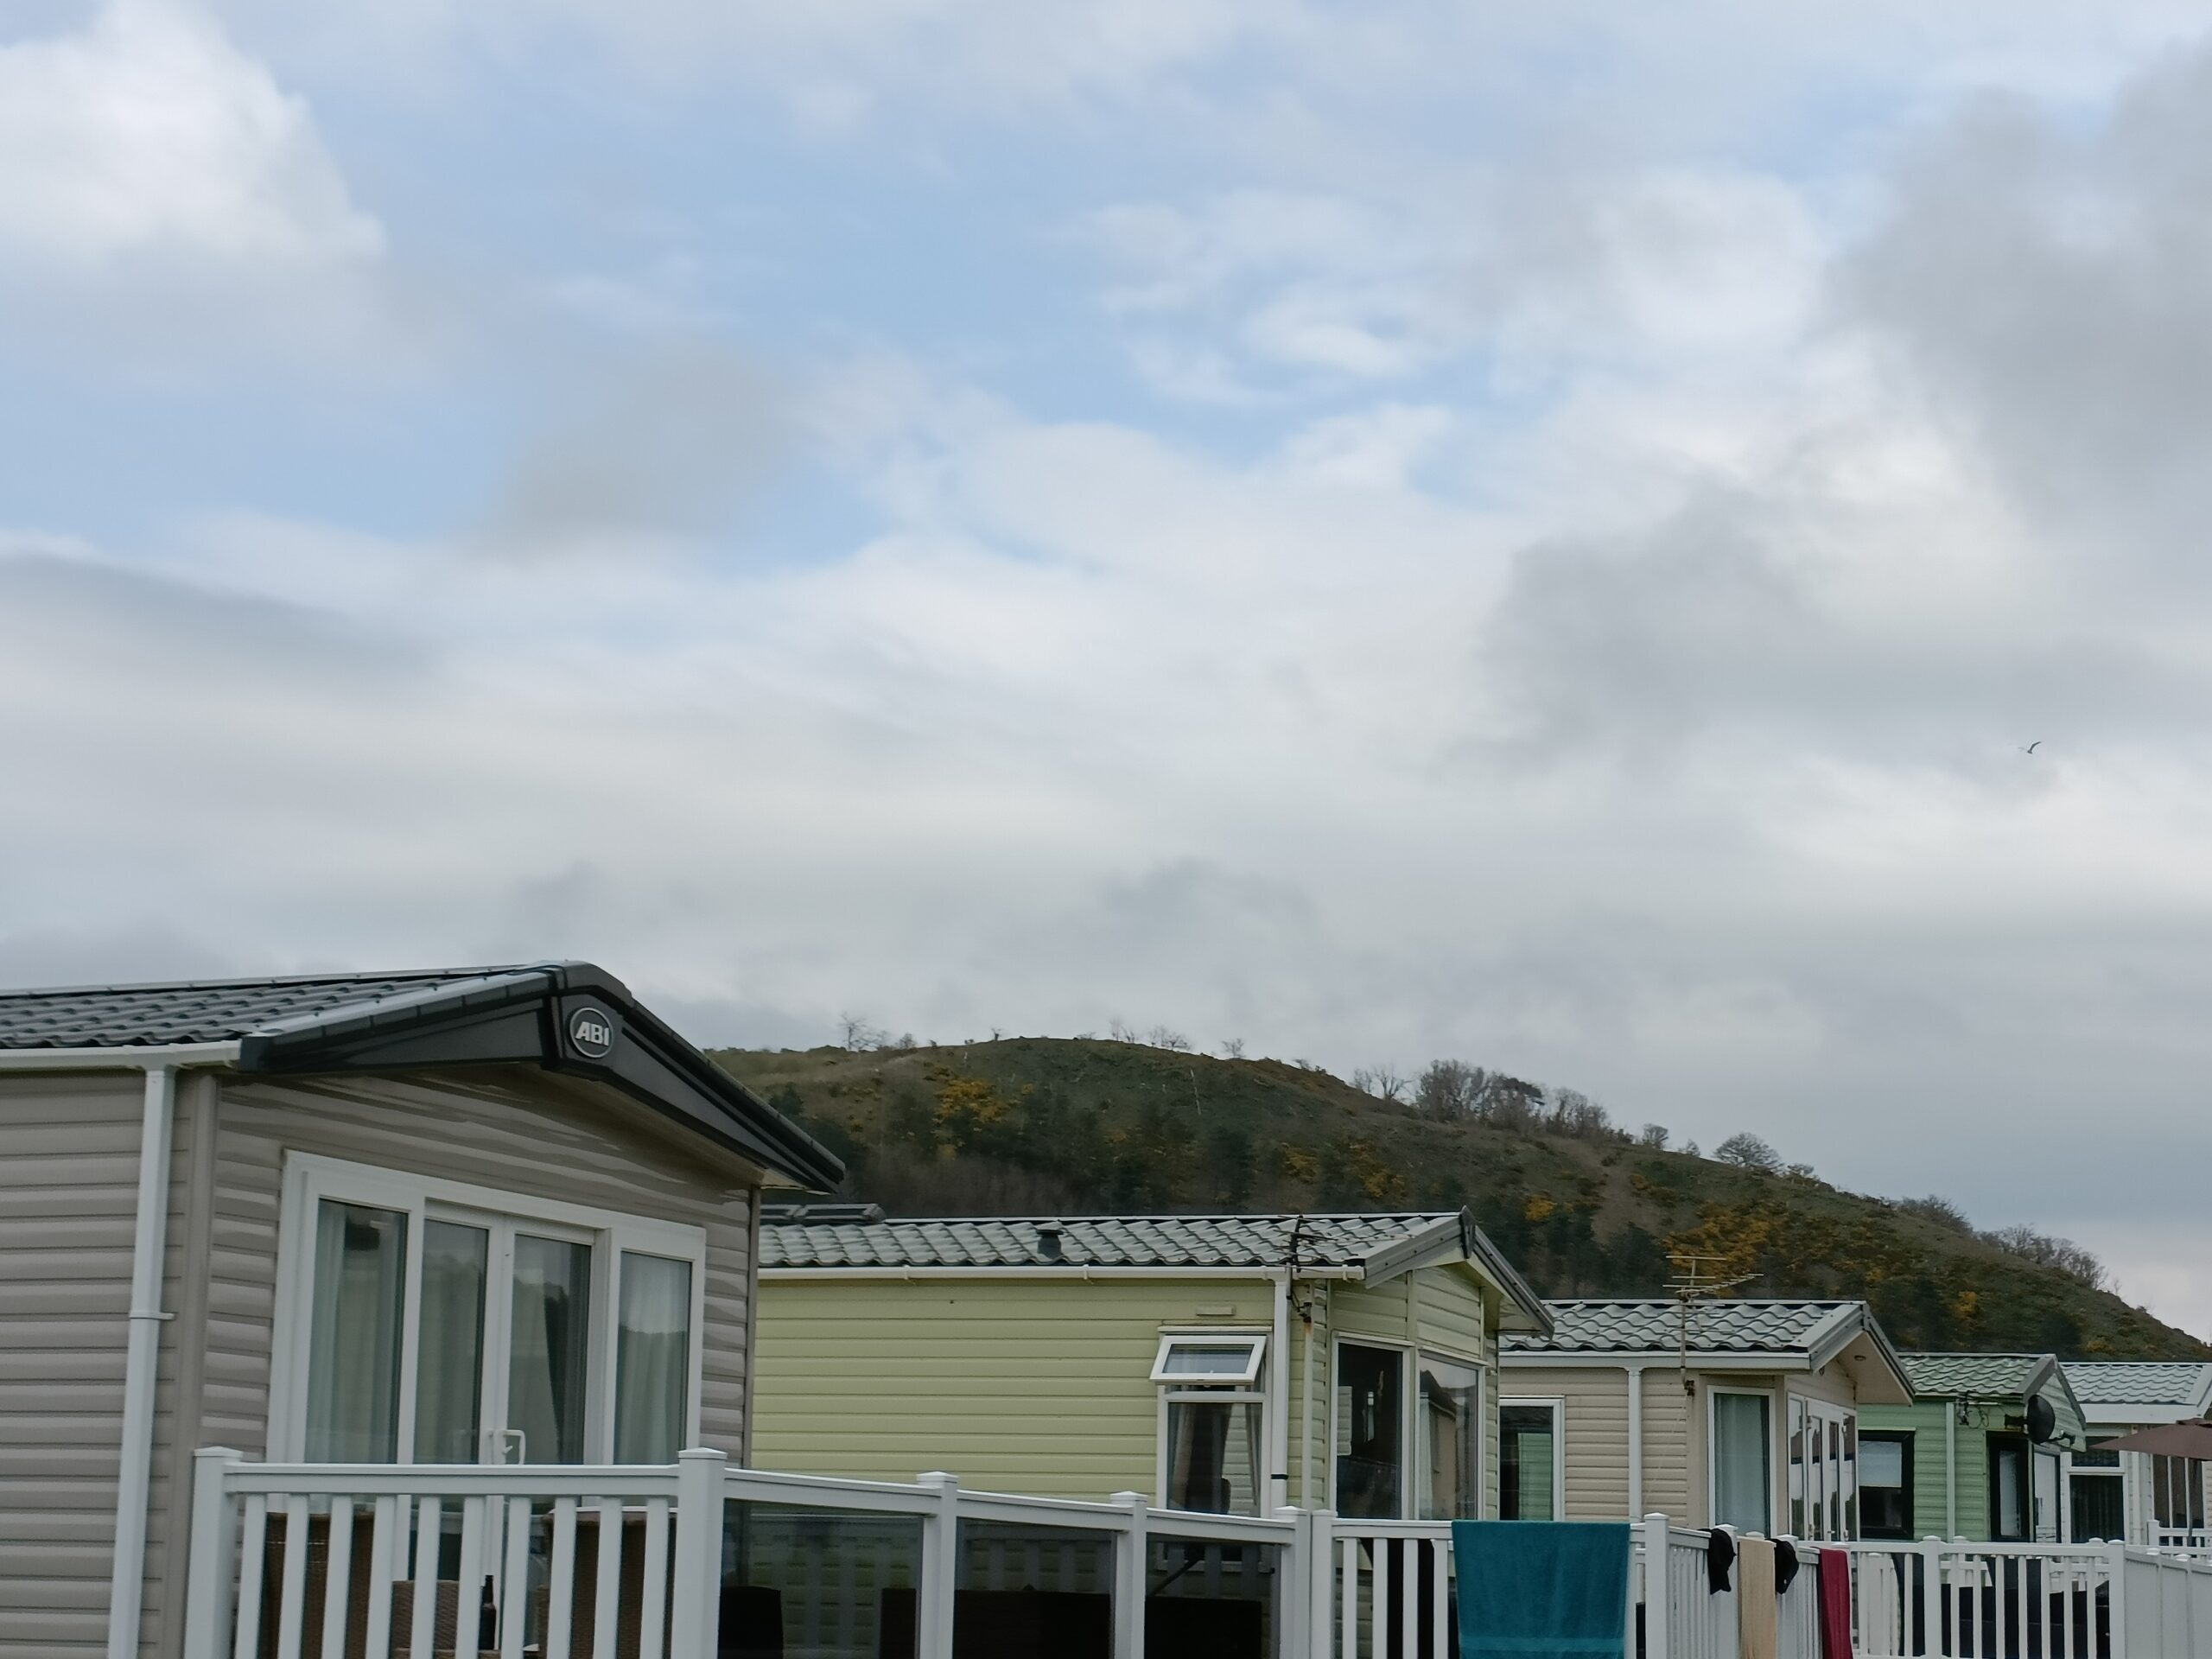 Plans for new lodge and caravan park for Porthcawl set to go before Bridgend Council